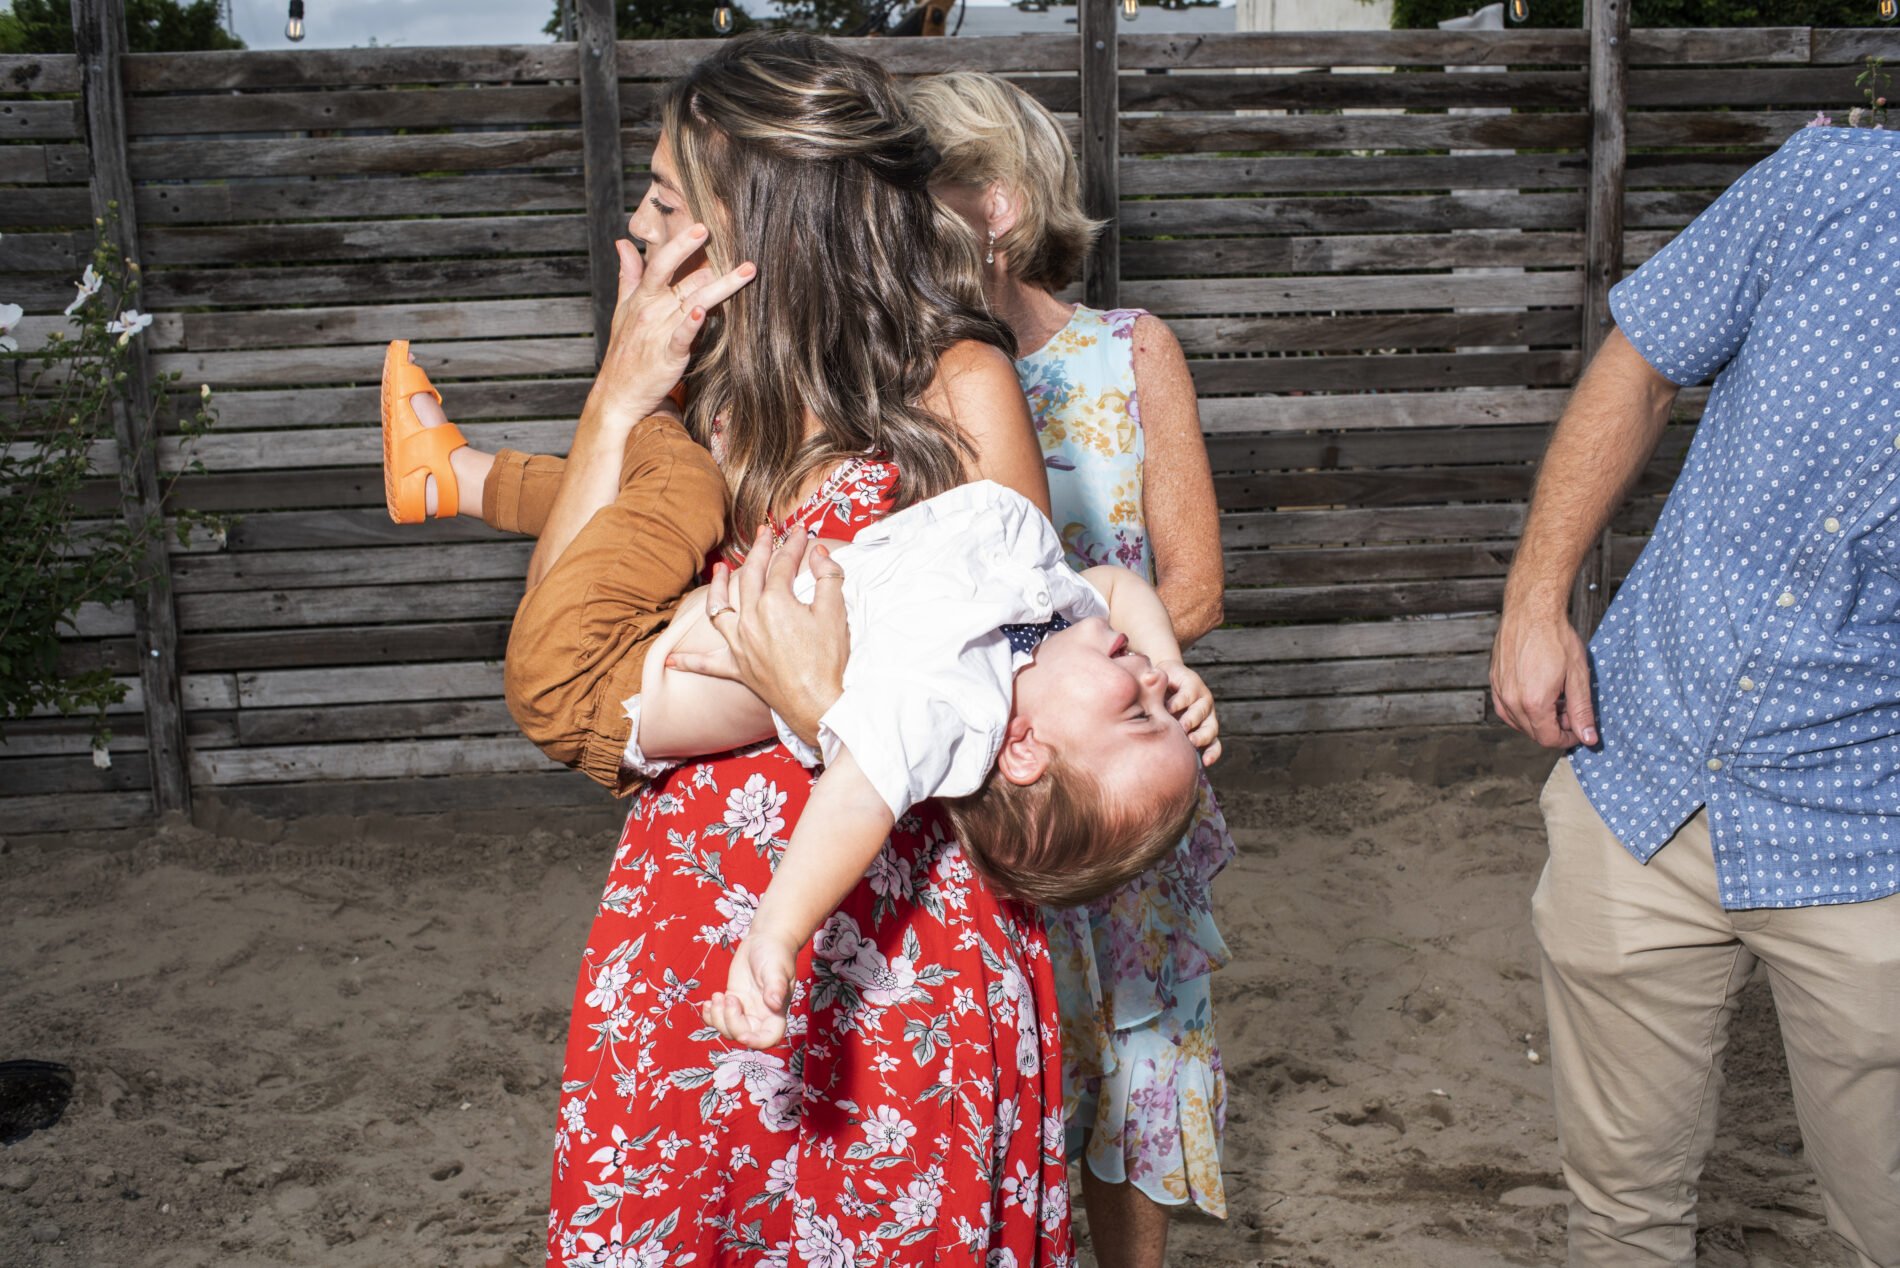 Beach Wedding Photography. Mom at a summer wedding holding her toddler in Far Rockaway, NY. Shot by Angela Cappetta NYC Wedding photographer with a Nikon DSLR.